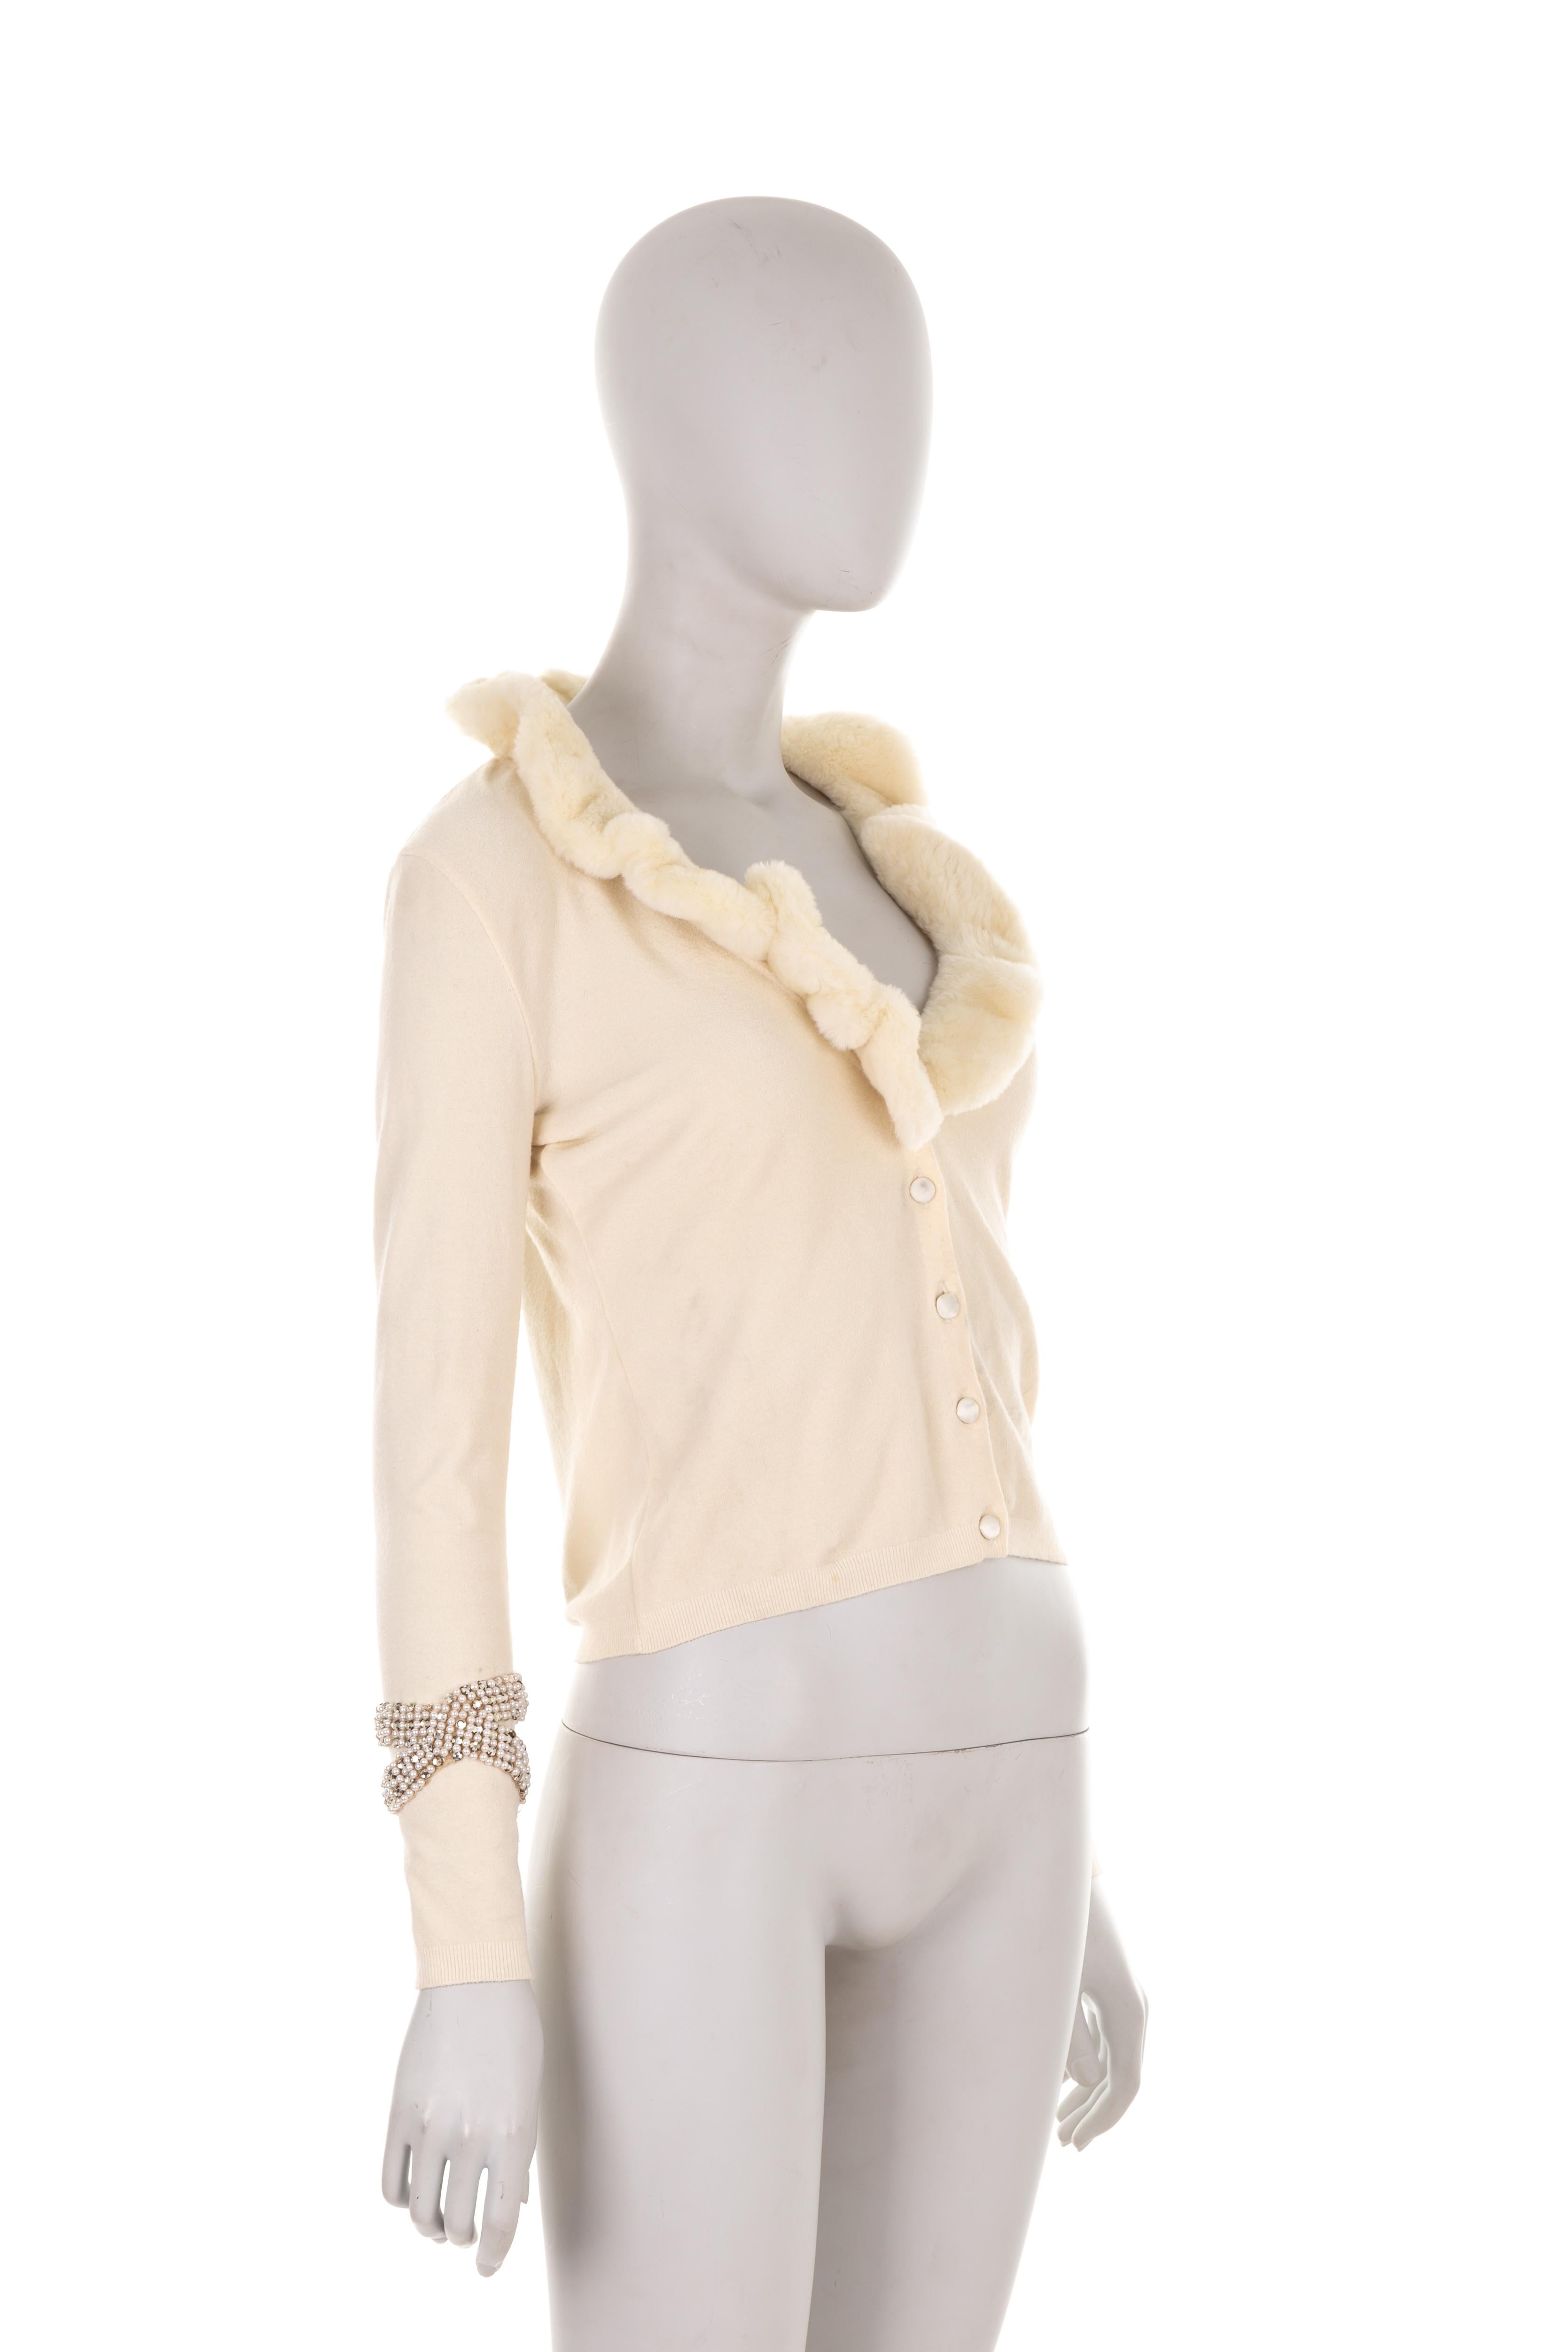 - Blumarine by Anna Molinari
- Sold by Gold Palms Vintage
- Spring summer 2007 collection
- Off-white wool crop cardigan
- Long sleeve
- Rabbit fur collar
- Swarovski and pearl sleeve embroidery
- No size label (fits S)

Shoulder to shoulder: 39 cm/